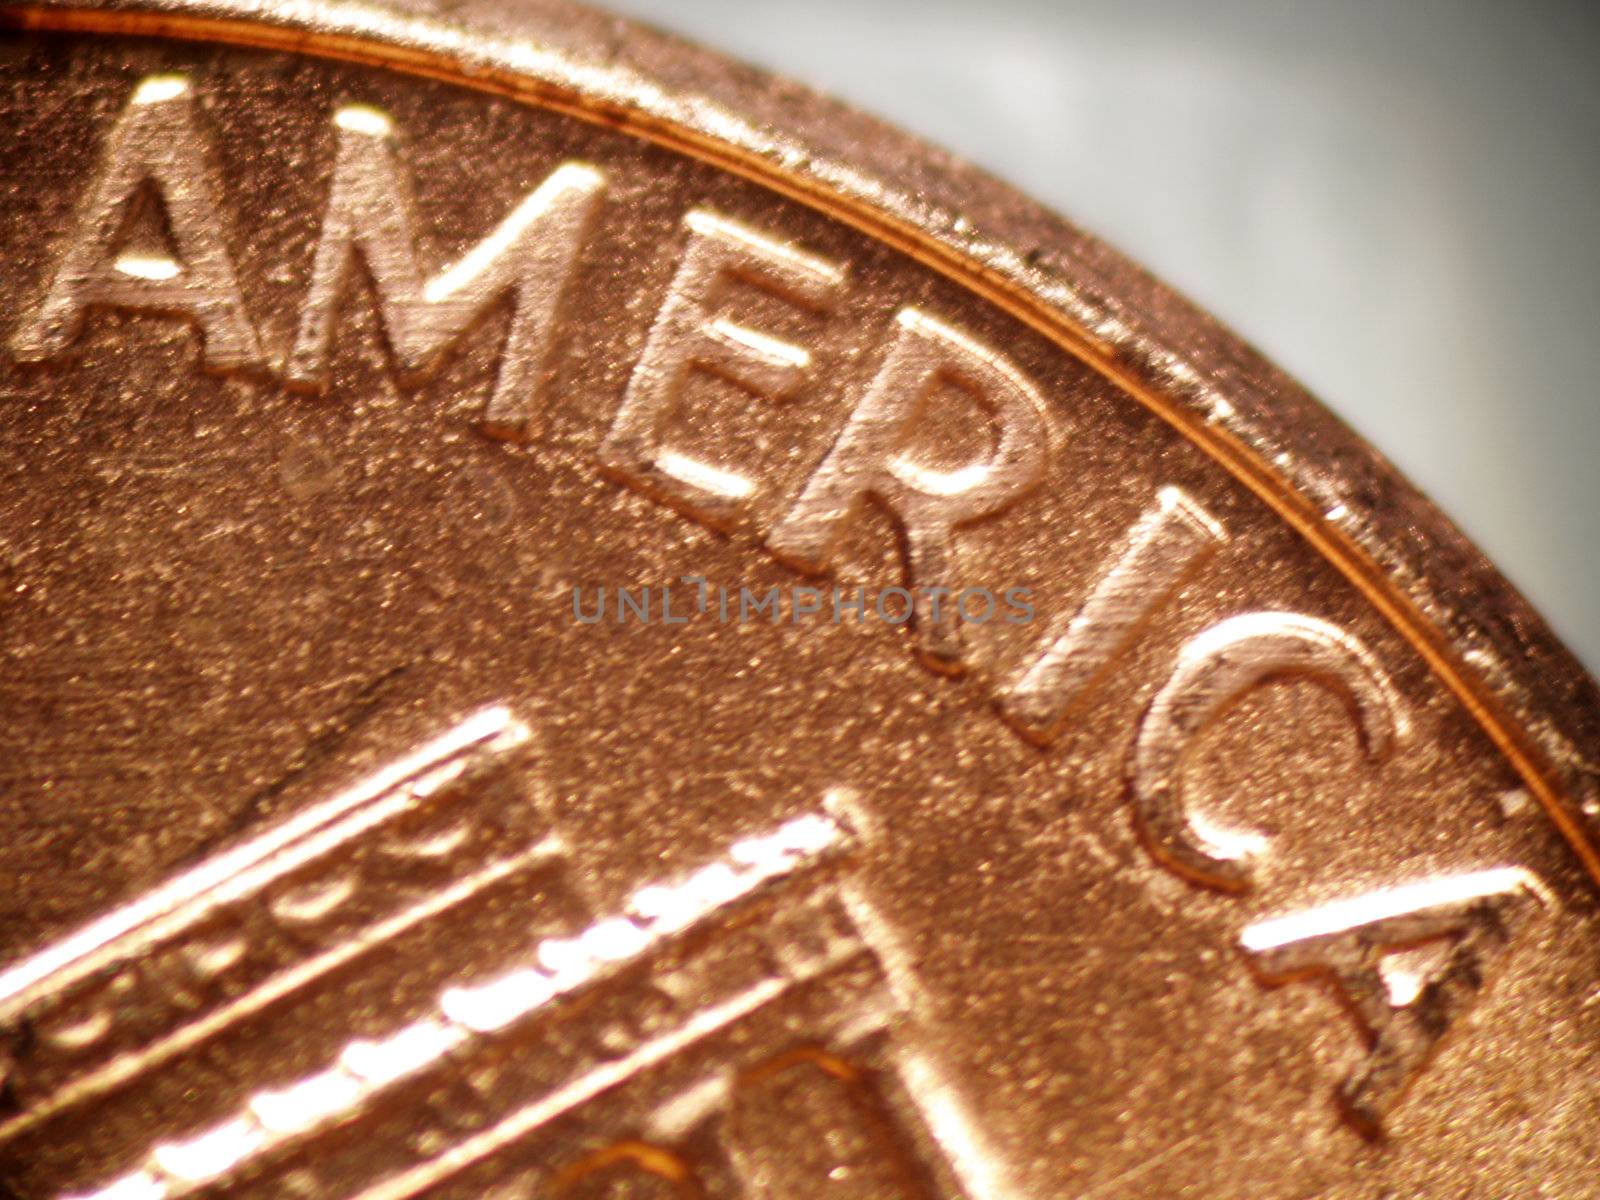 Macro of a penny focused on the word "AMERICA"